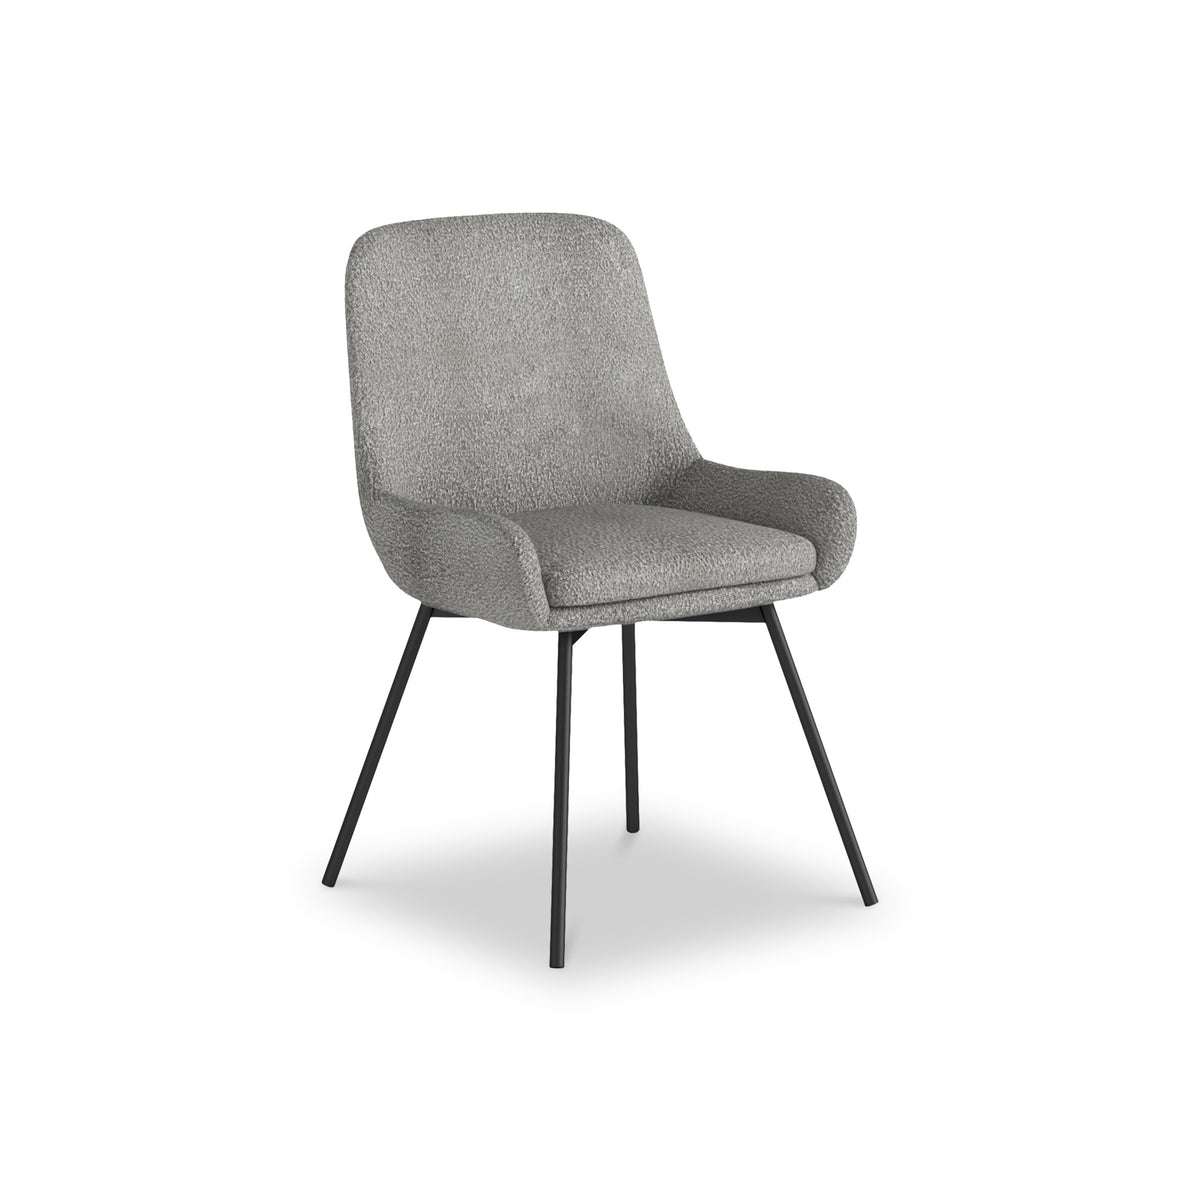 Shorwell Grey Boucle Curved Seat Dining Chair from Roseland Furniture